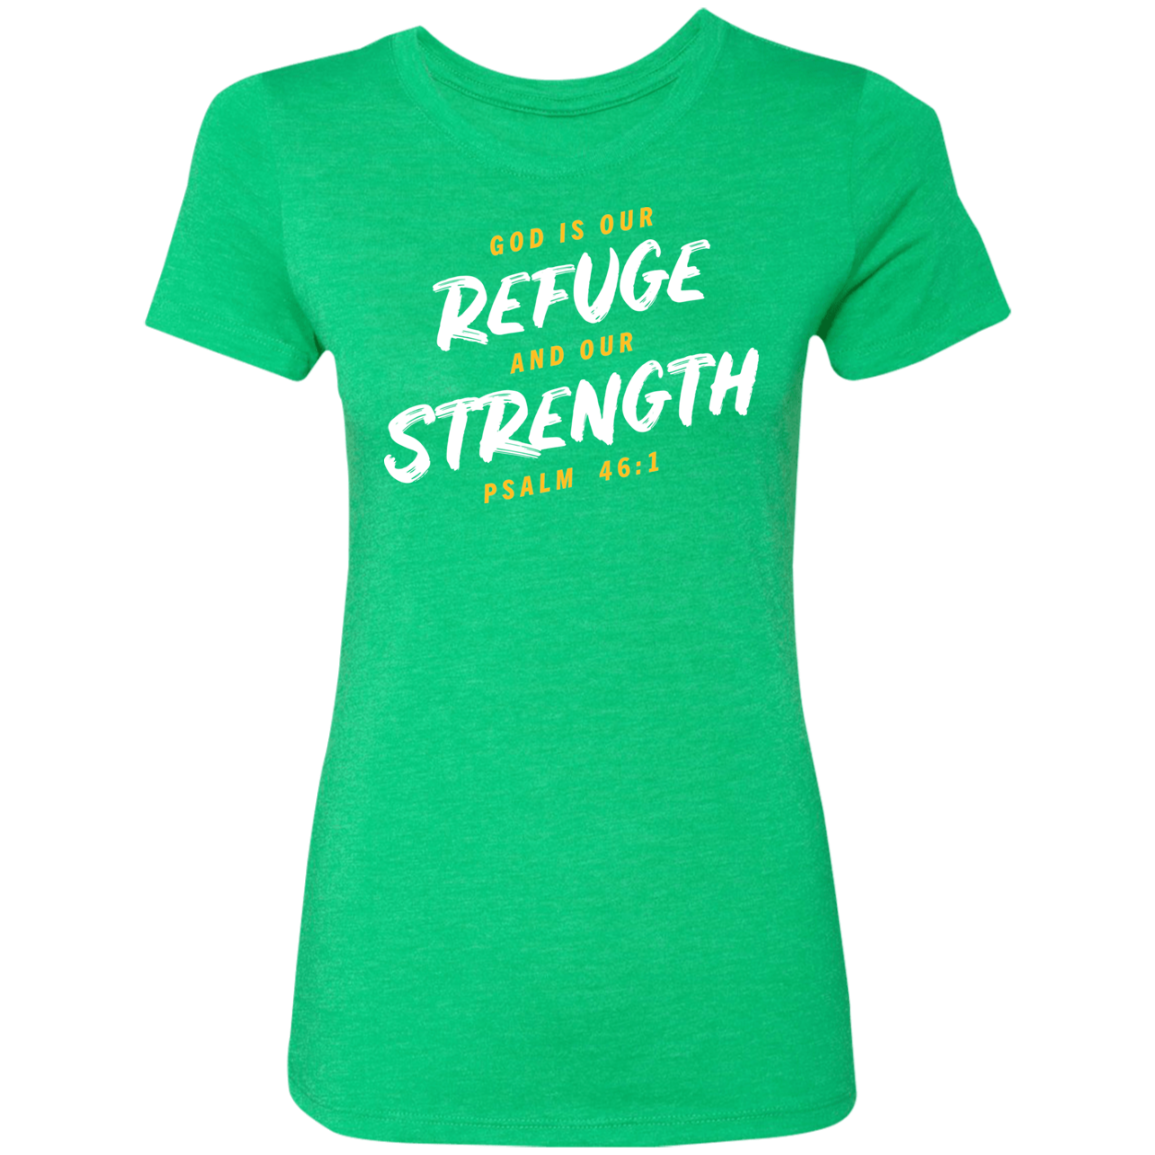 Refuge and Strength | Ladies’ Triblend T-Shirt